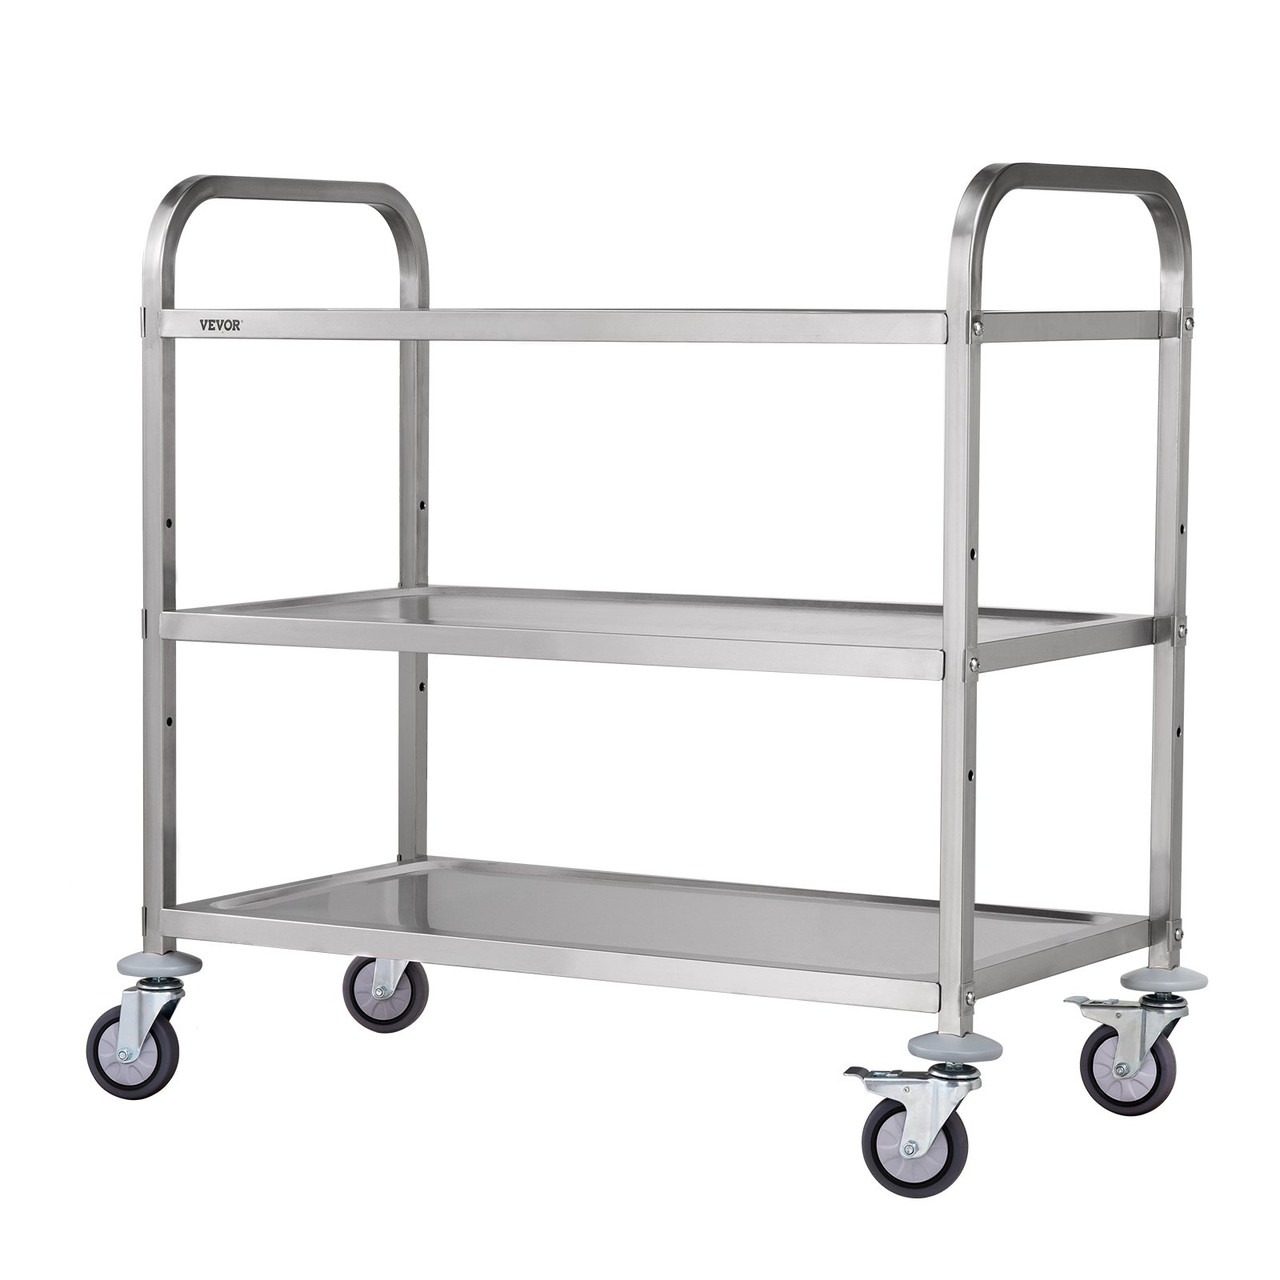 VEVOR Kitchen Utility Cart, 3 Tiers, Wire Rolling Cart w/ 450LBS Capacity, Steel Service Cart on Wheels, Metal Storage Trolley w/ 80mm Basket Curved Handle PP Liner 6 Hooks, for Indoor and Outdoor Use